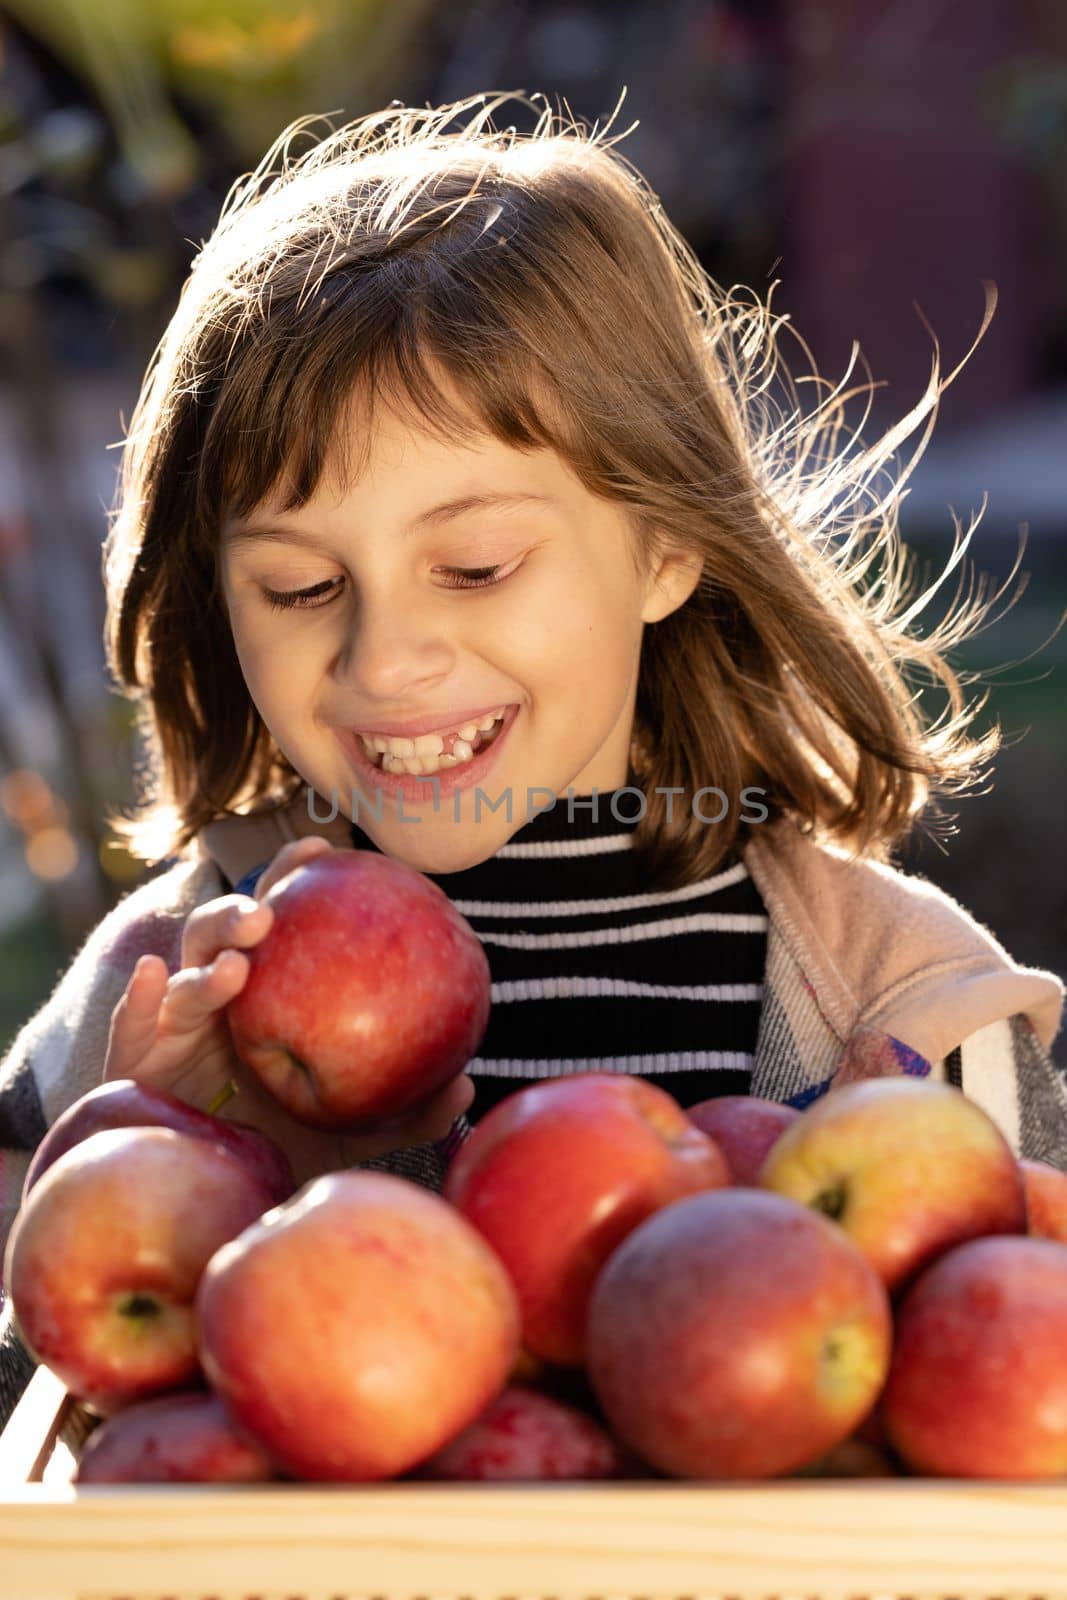 Attractive caucasian girl with apple. Smiling happy child with fresh fruit - emotional portrait close-up. Portrait of healthy girl eating big red apple